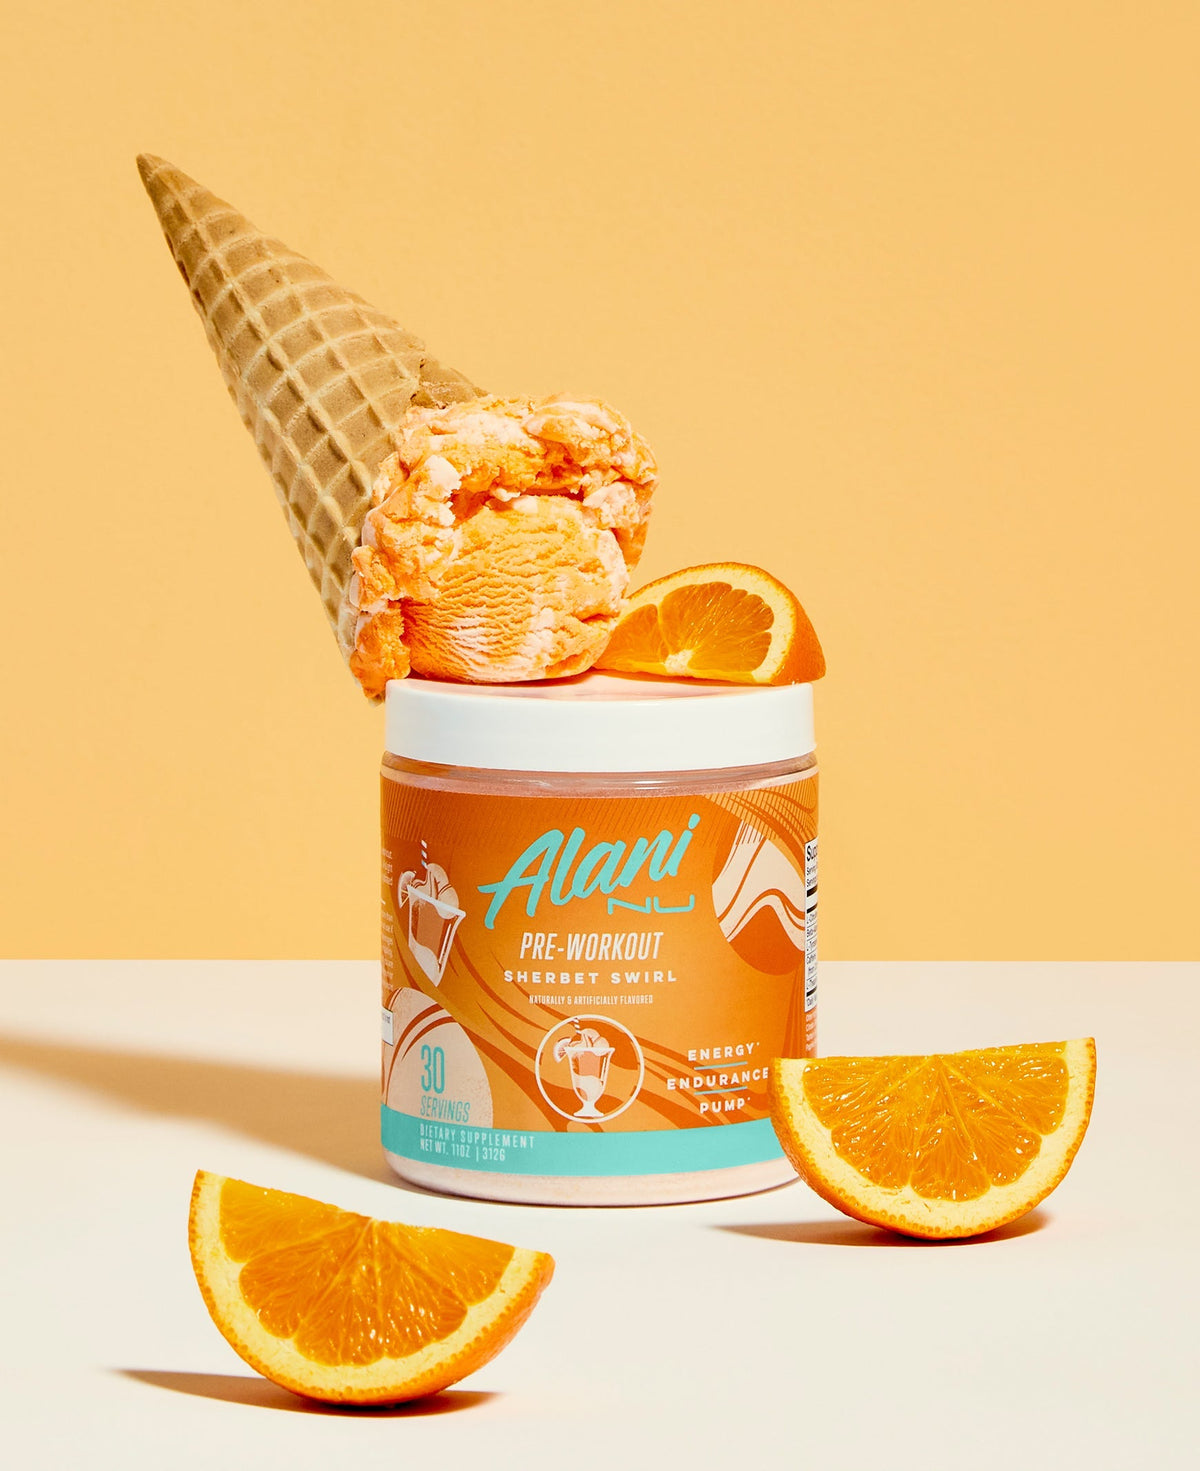 A container of Pre-Workout in Sherbet Swirl flavor next to an ice cream cone and orange slices on top of it.